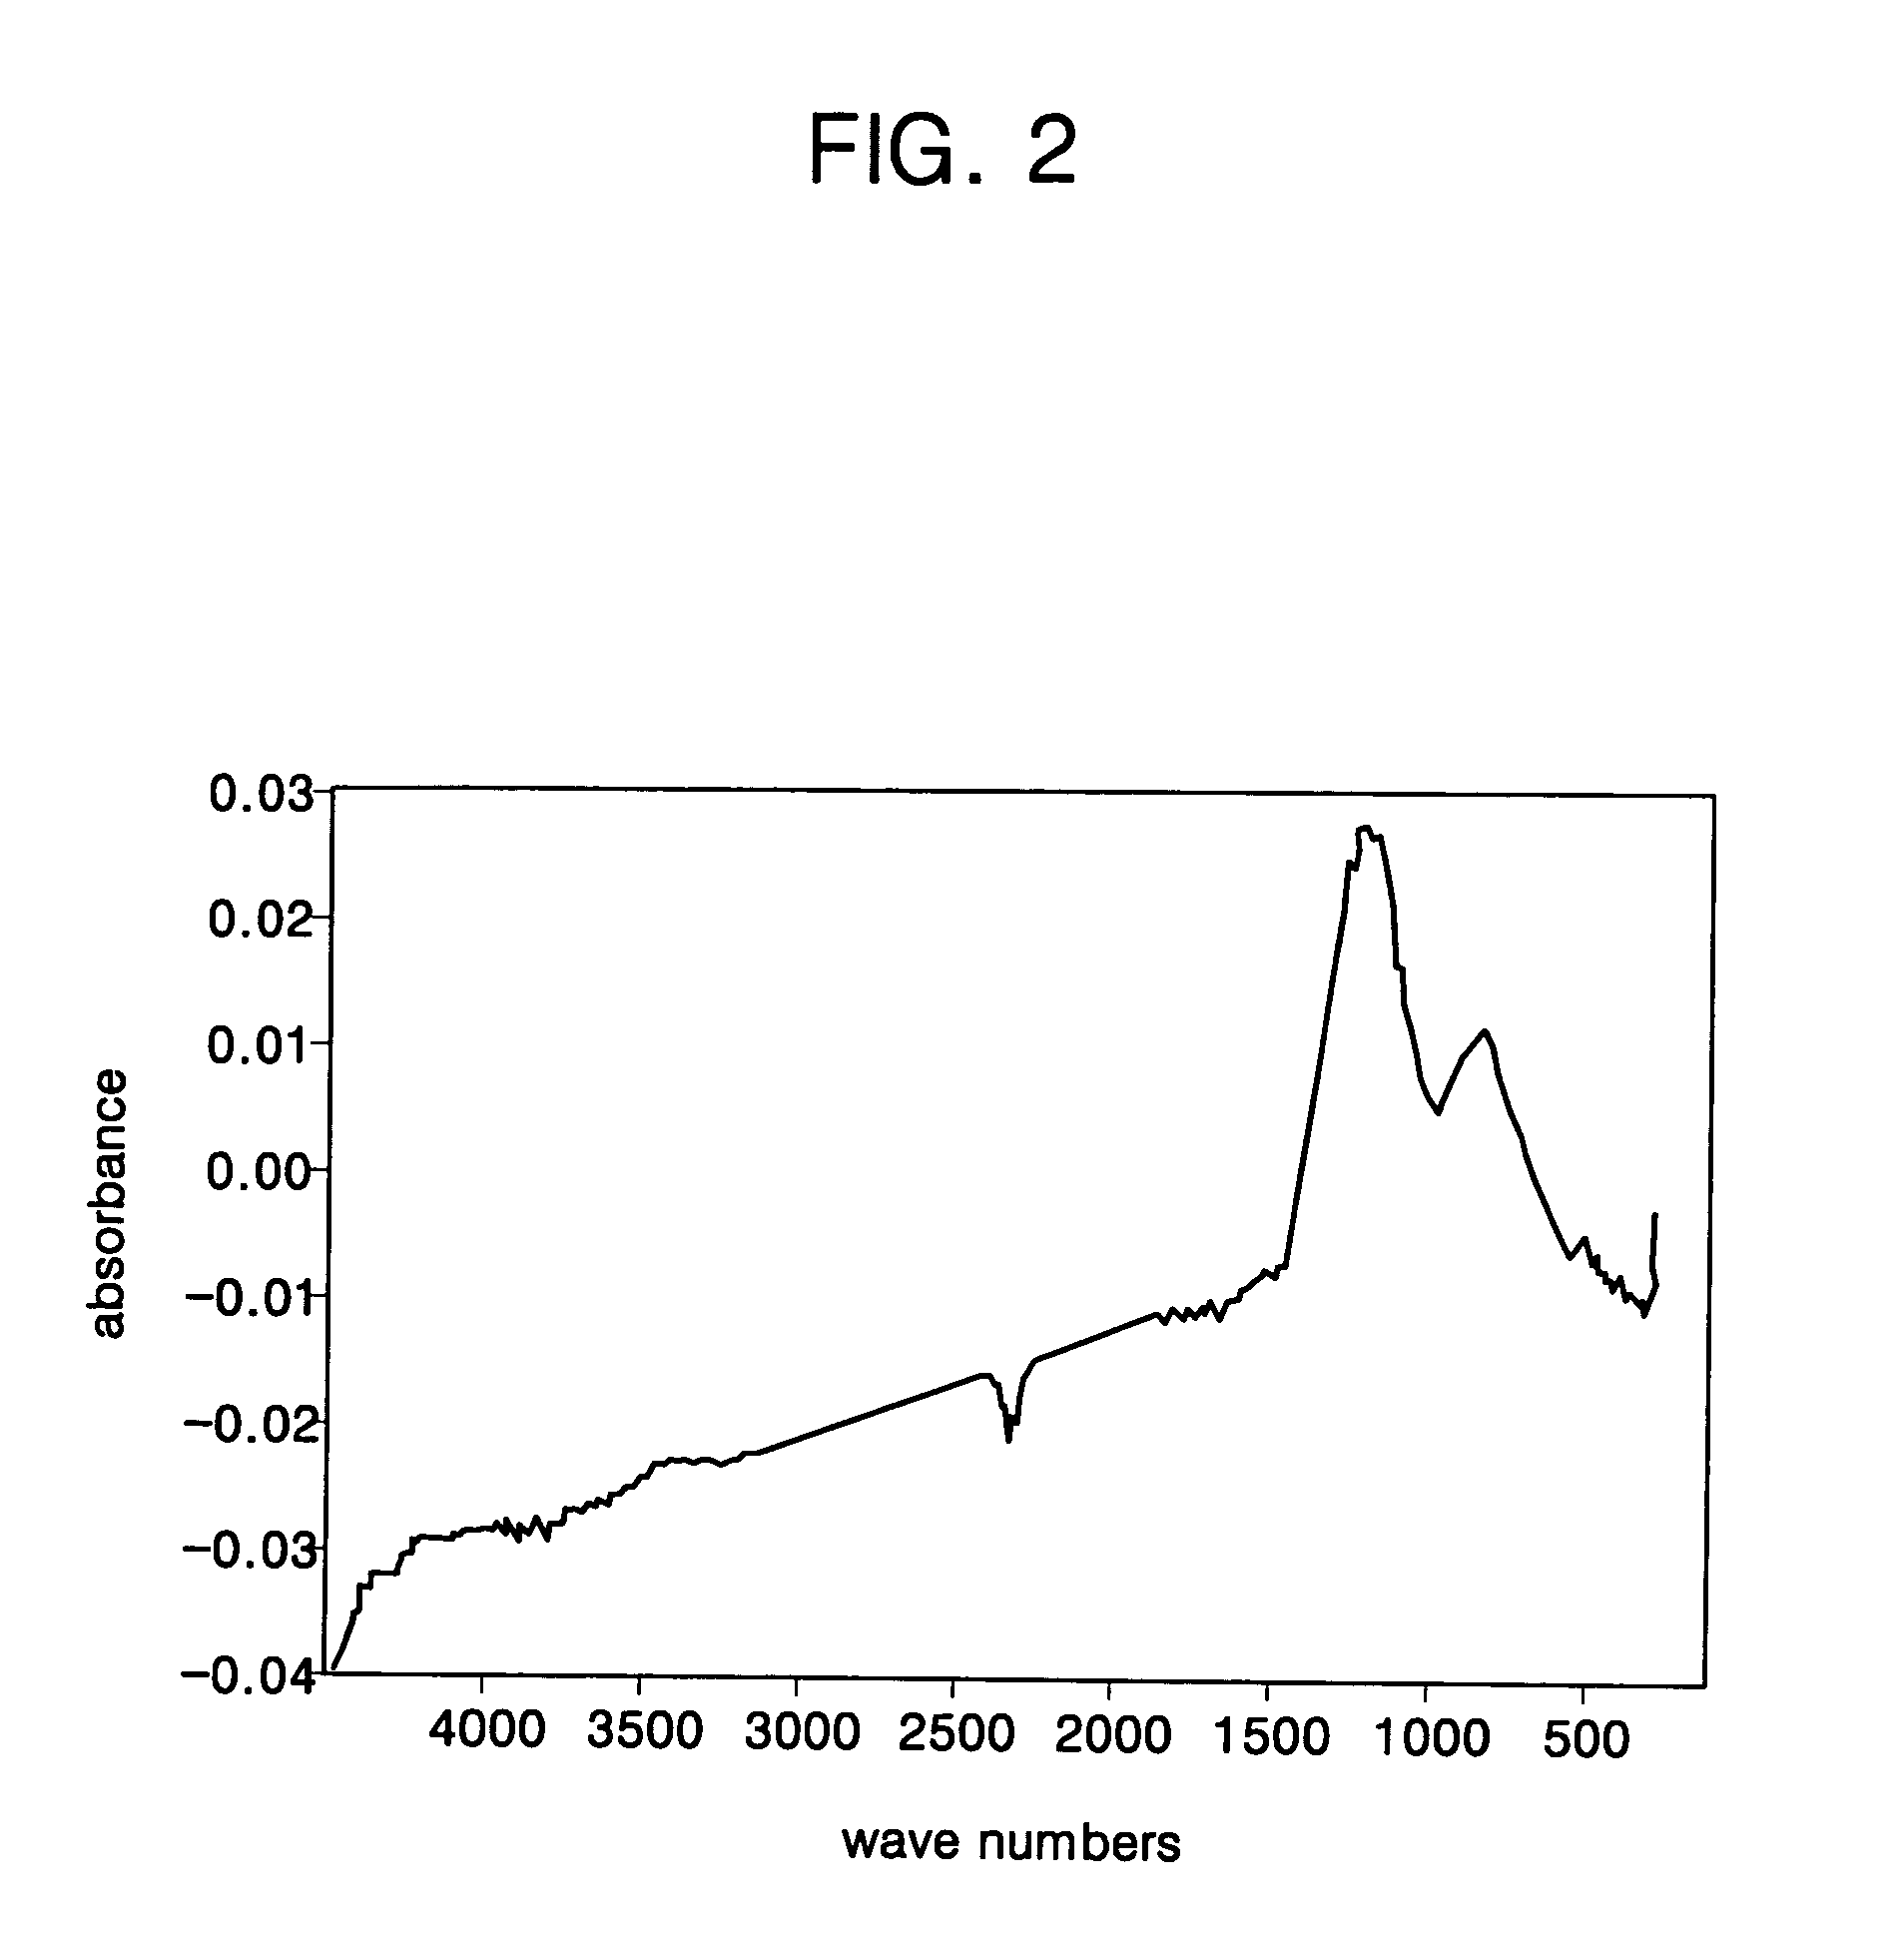 Method for forming a low-k dielectric layer for a semiconductor device